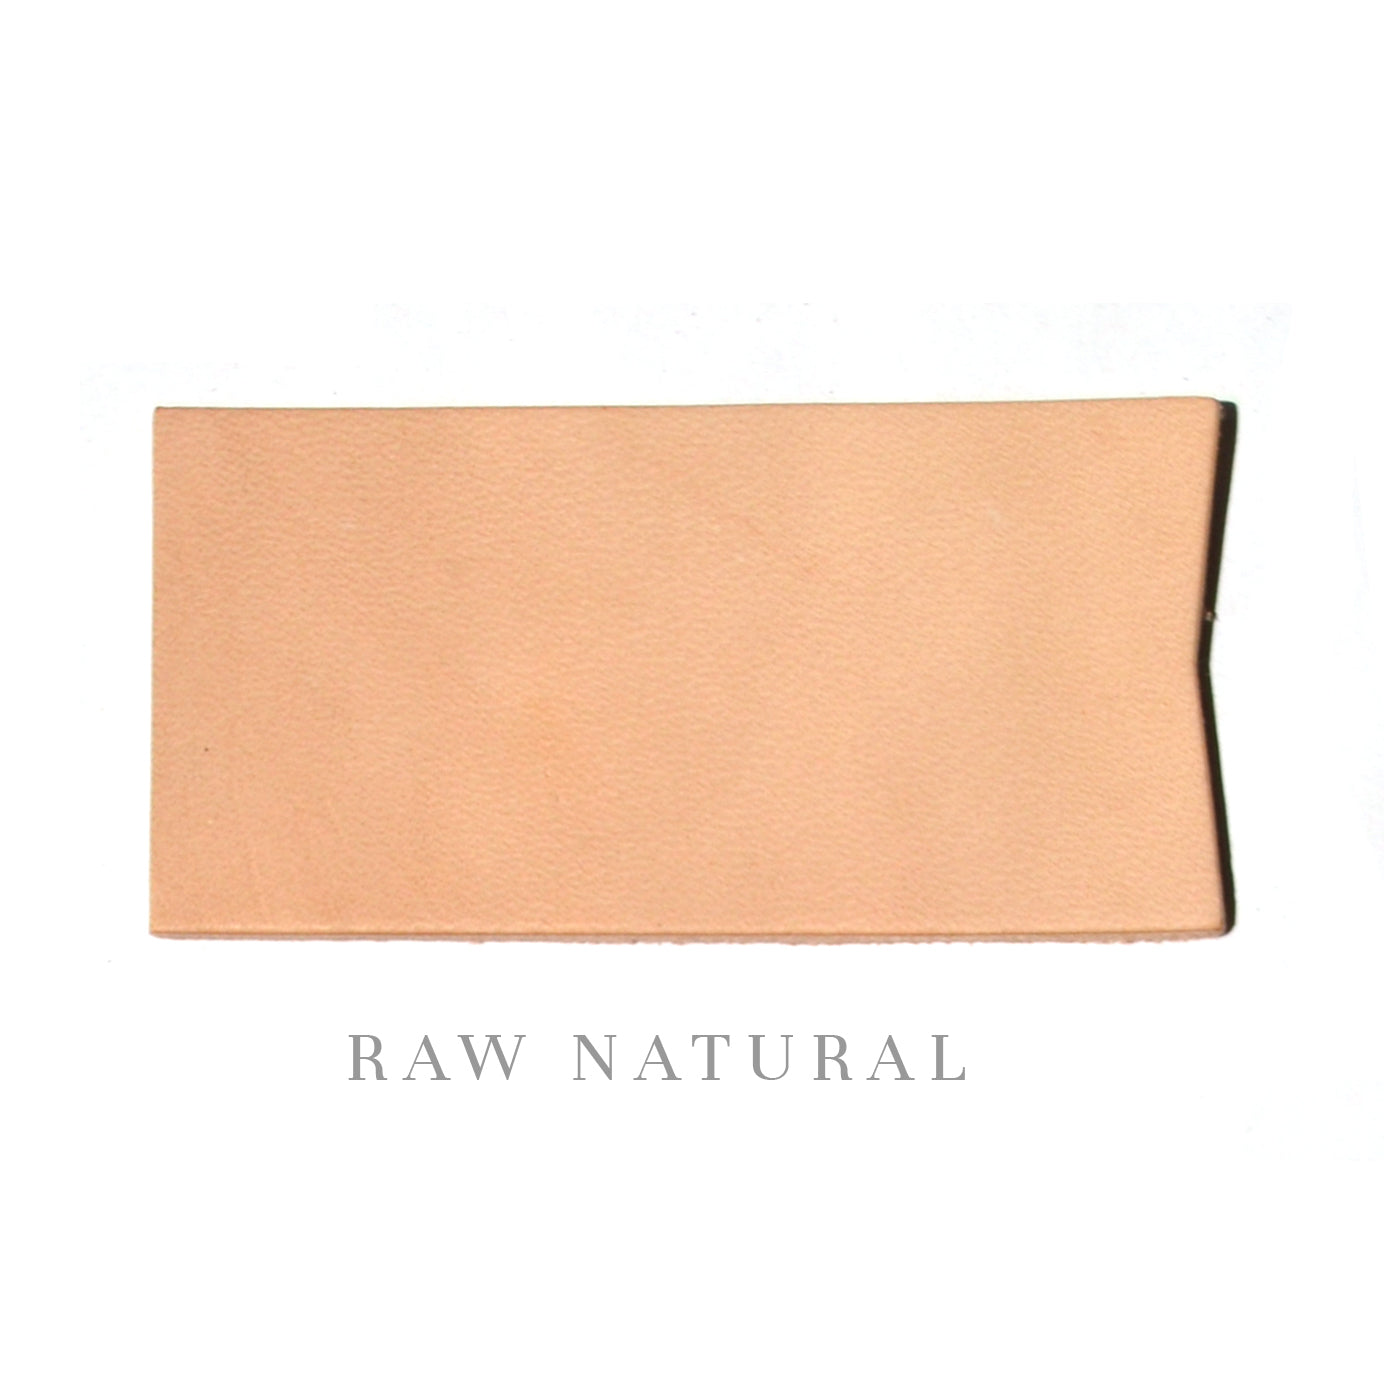 Rectangular-like swatch of raw natural leather. 